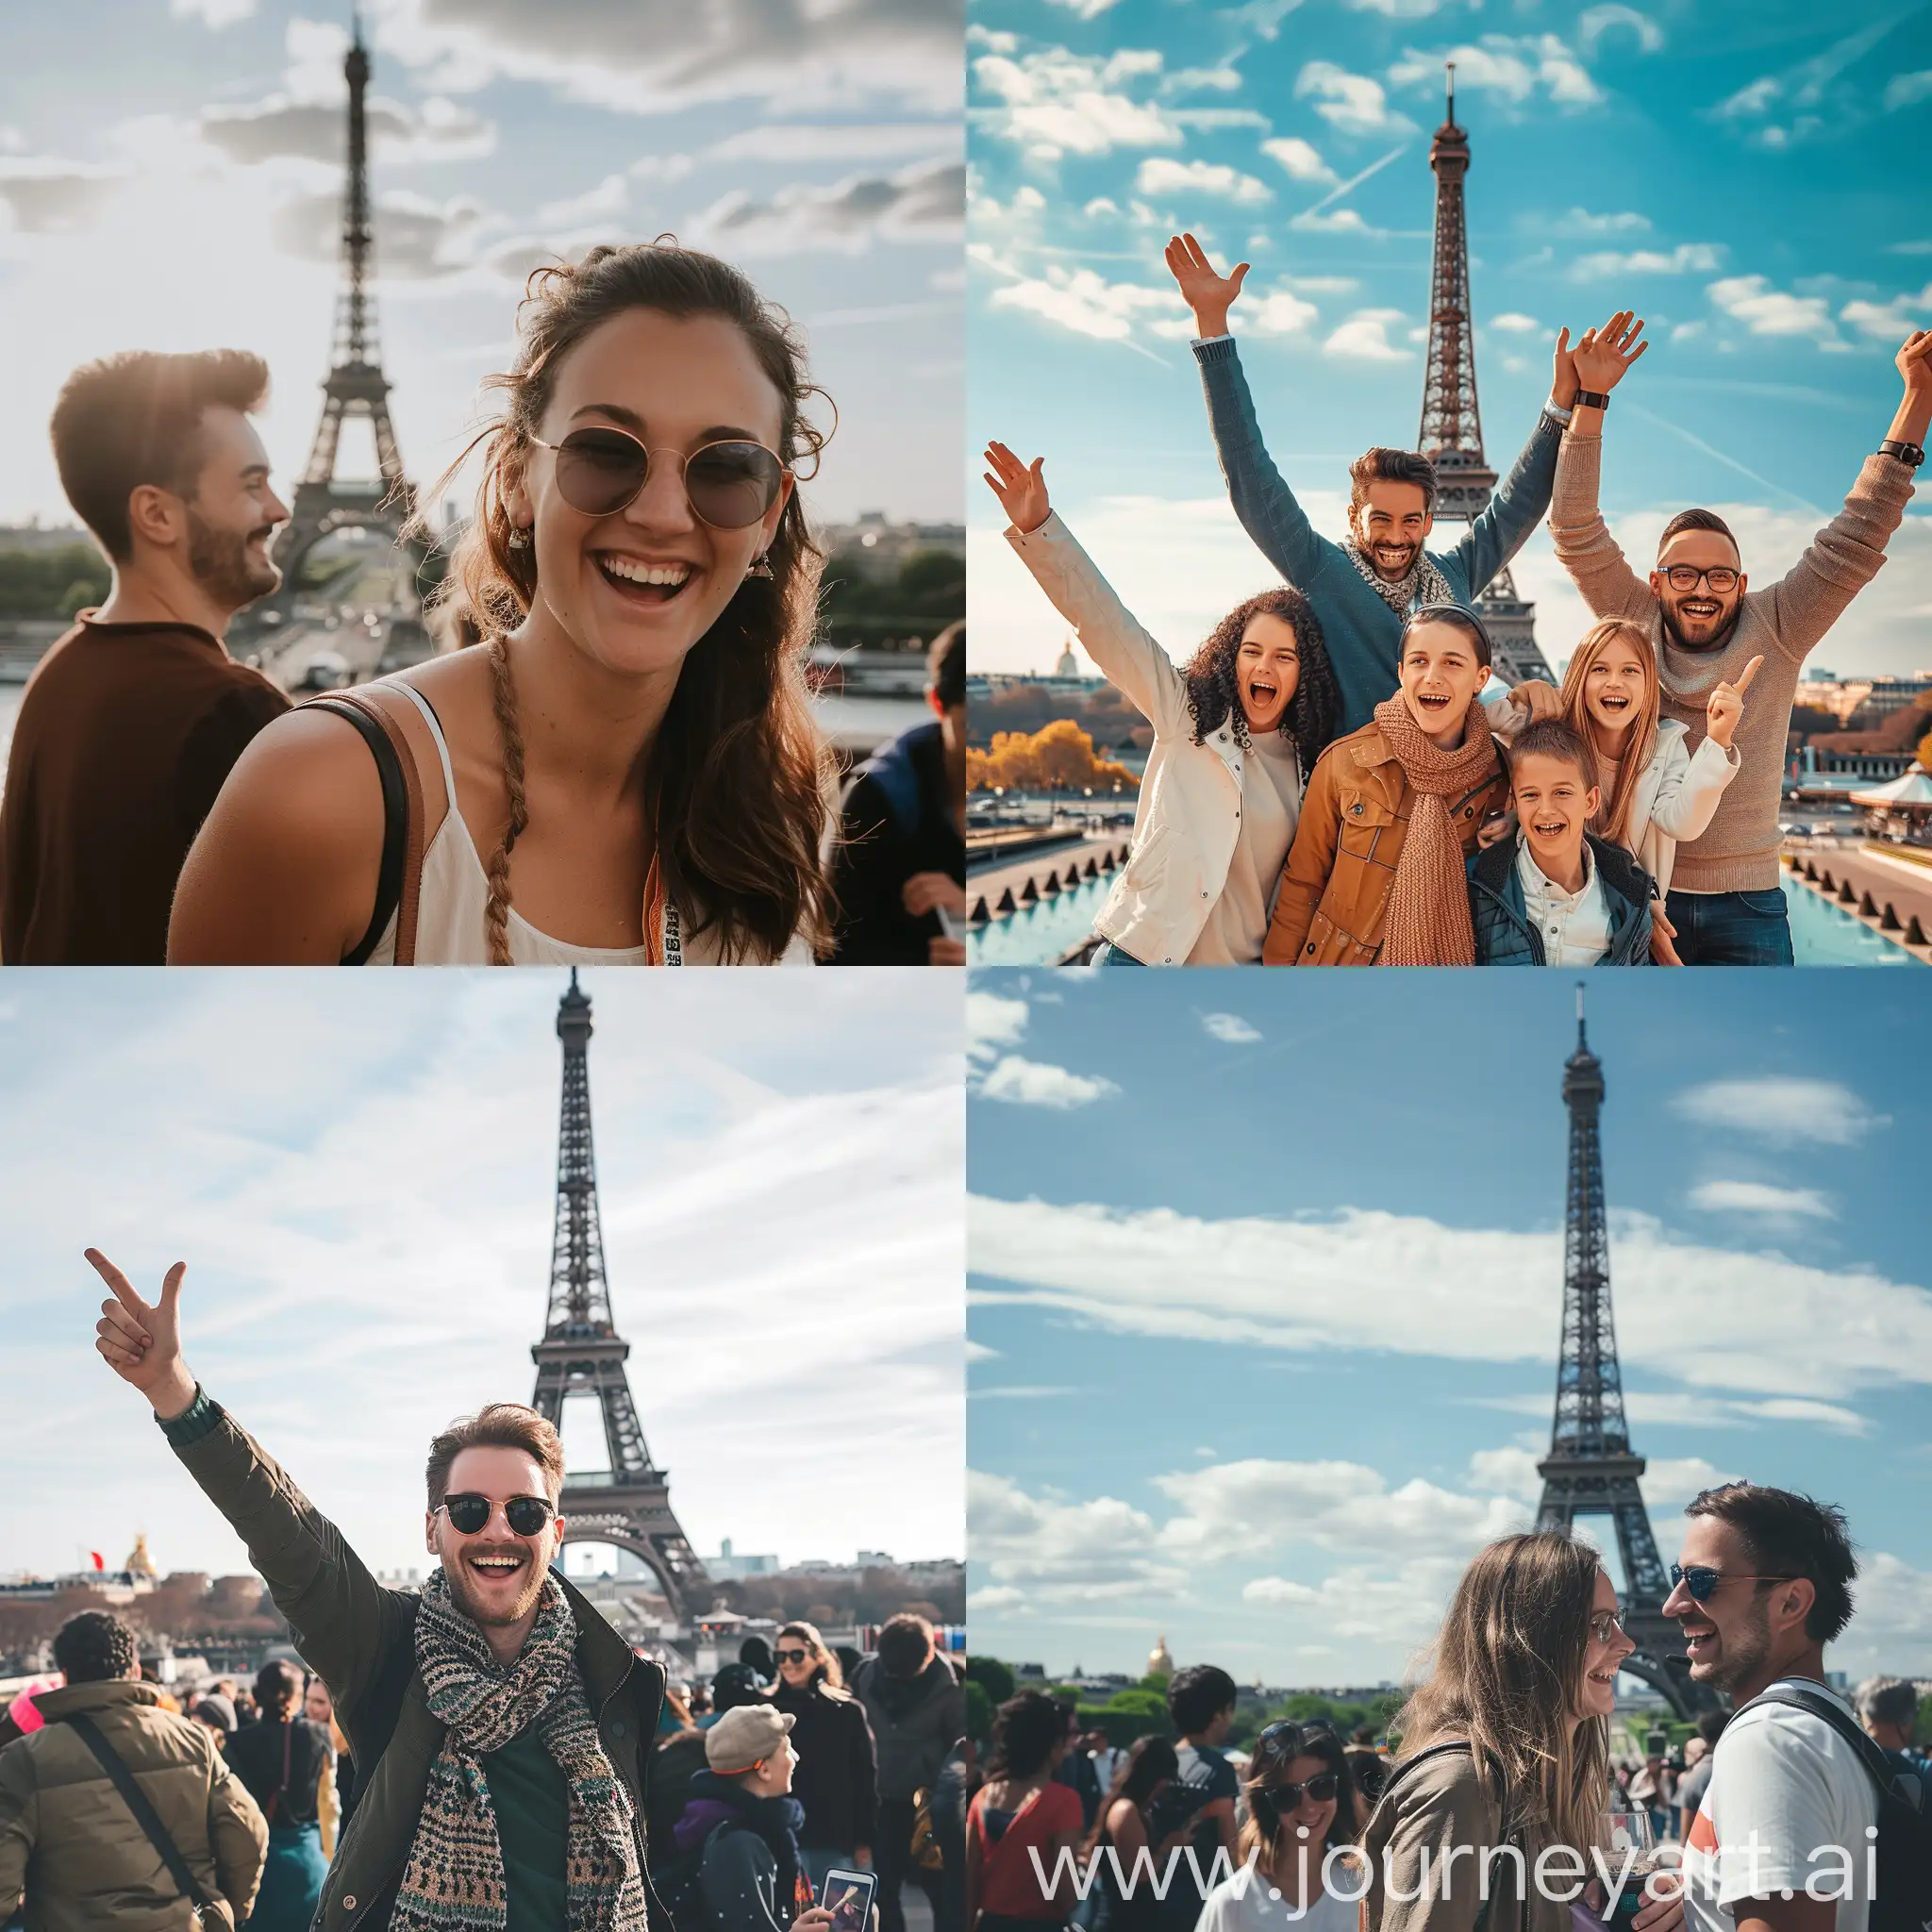 Generate picture of happy people at paris